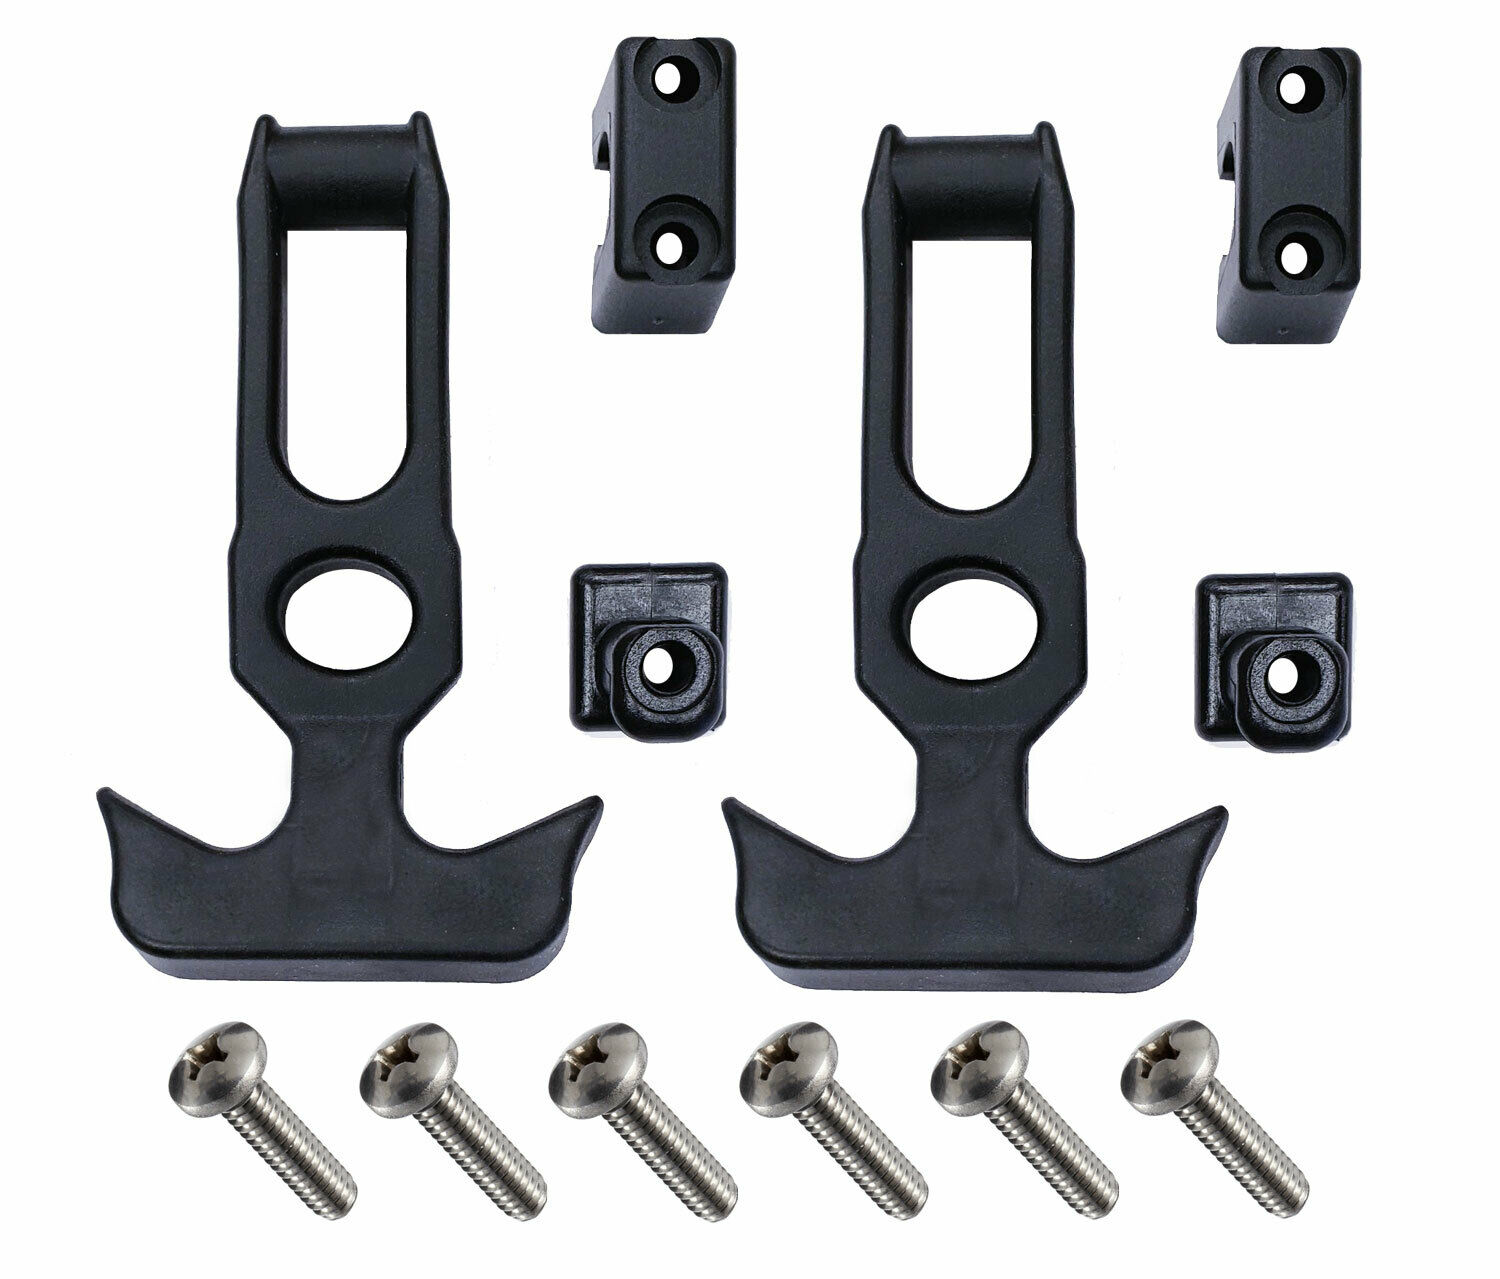 Roto Molded Cooler T-latch Handle Kit - Ozark Trail Style